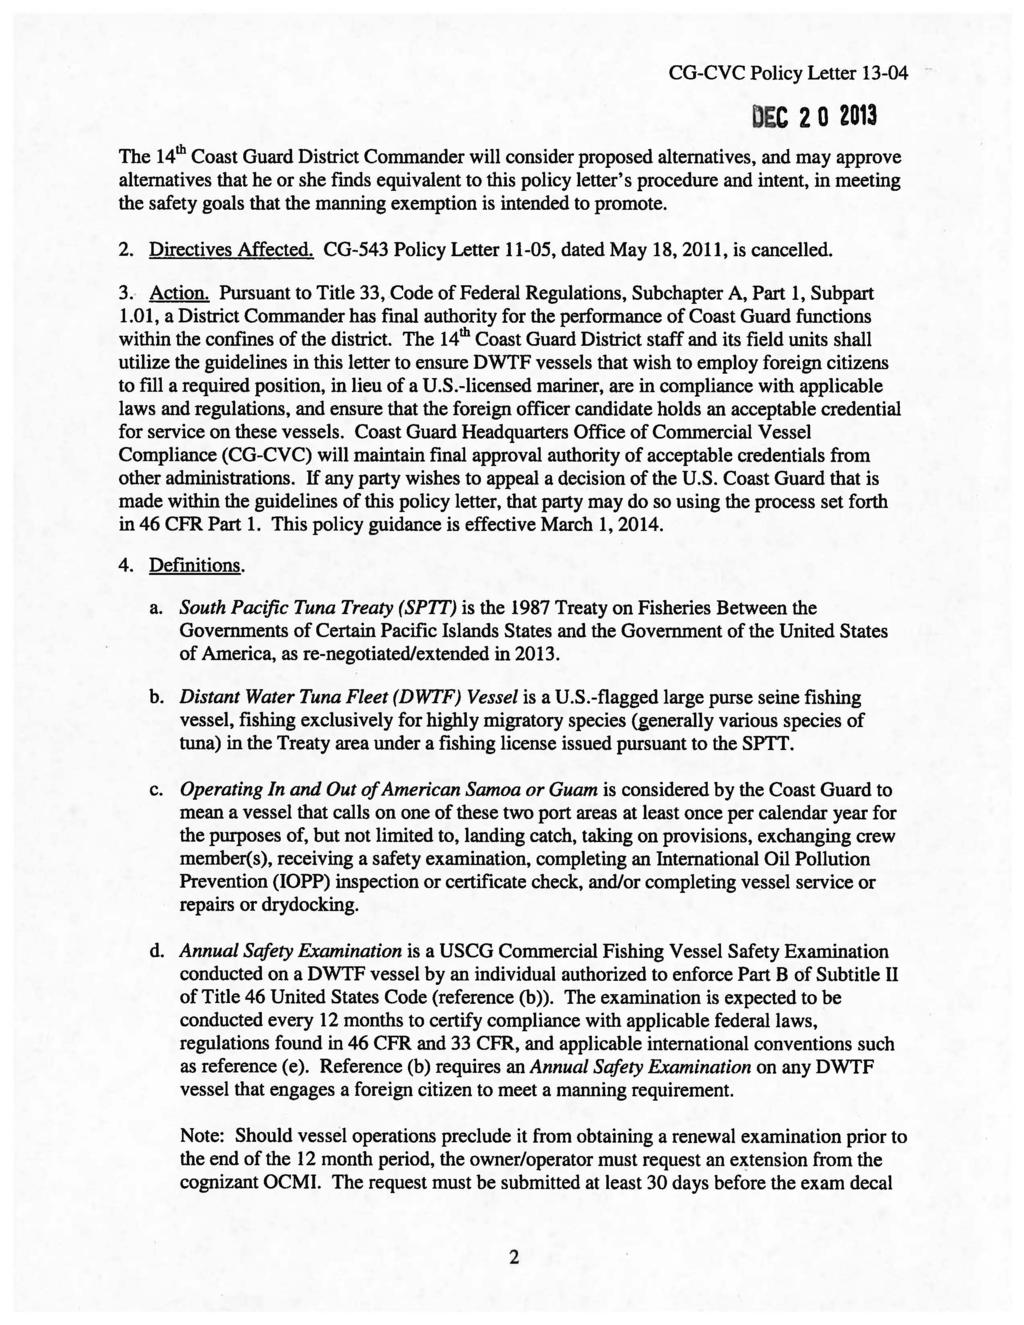 - DEC2o 2013 The 14th Coast Guard District Commander will consider proposed alternatives, and may approve alternatives that he or she finds equivalent to this policy letter's procedure and intent, in